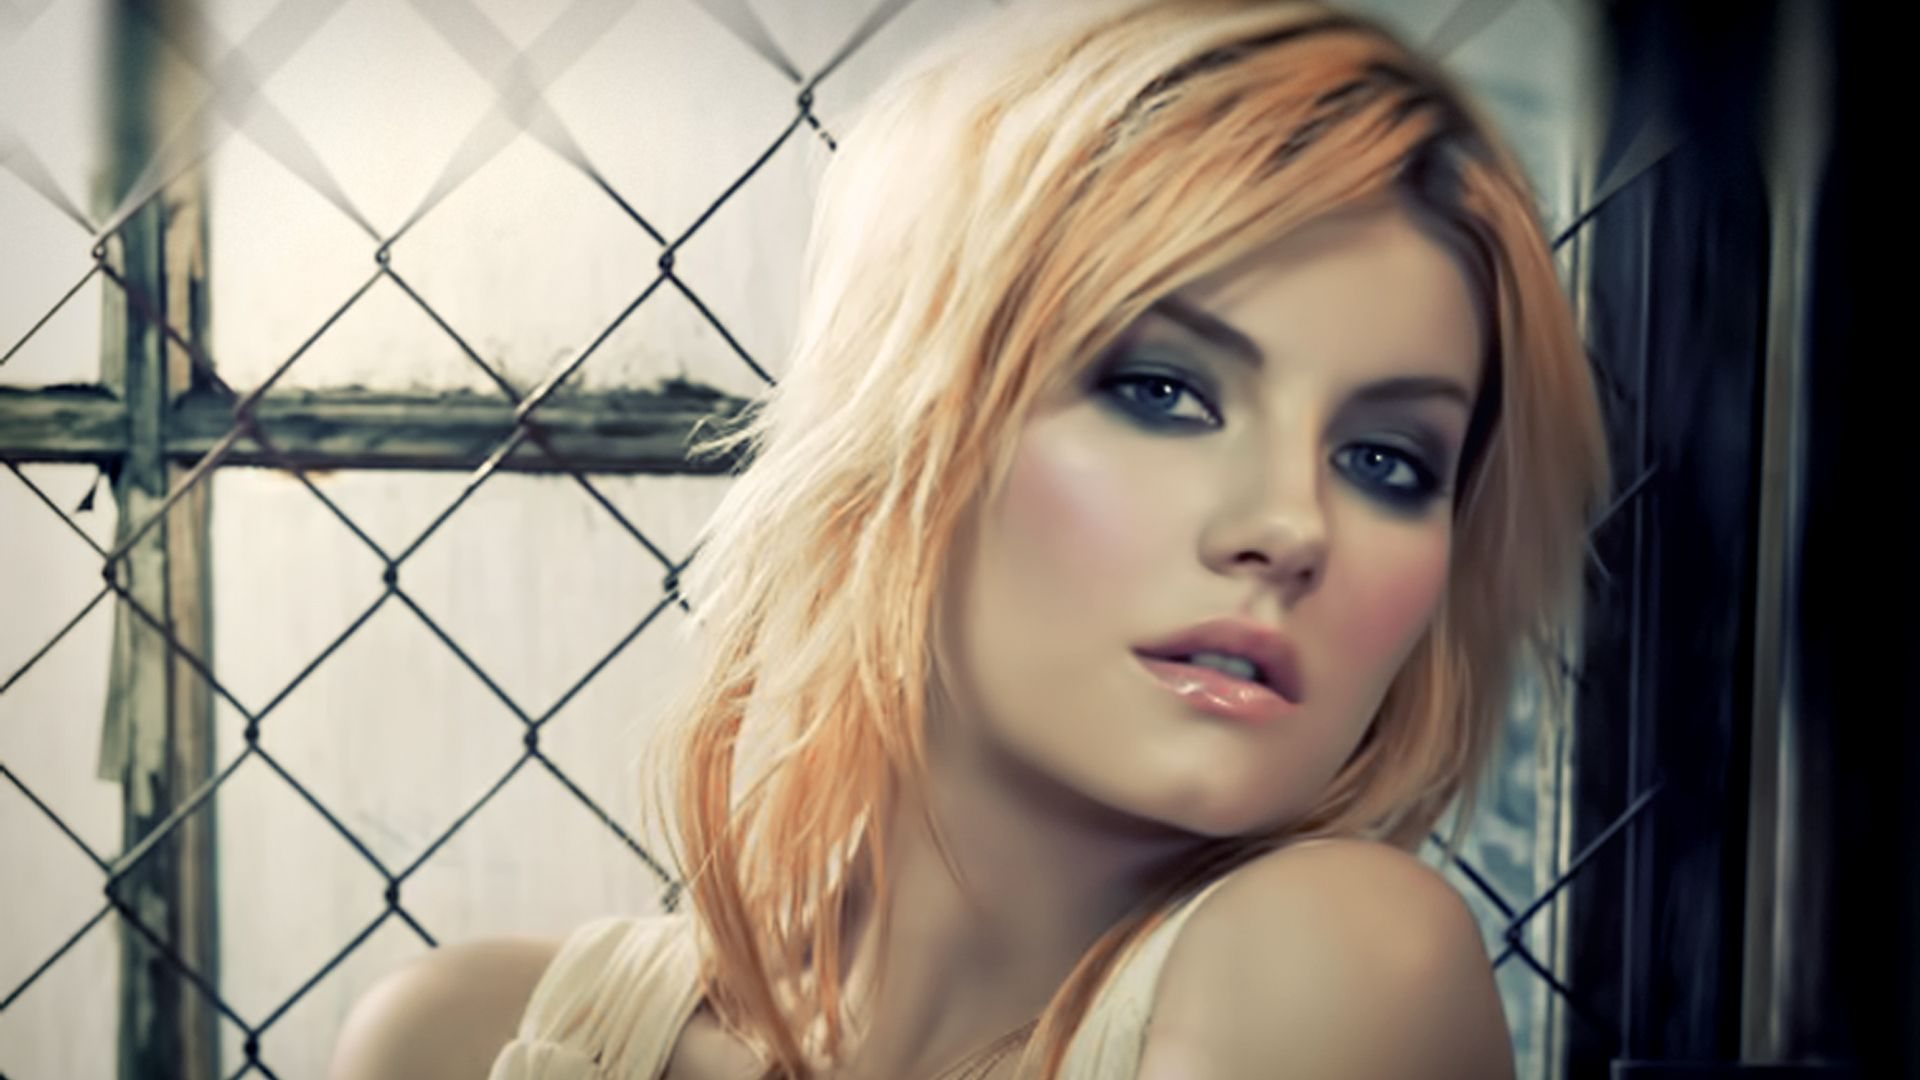 charming elisha cuthbert hd picture download